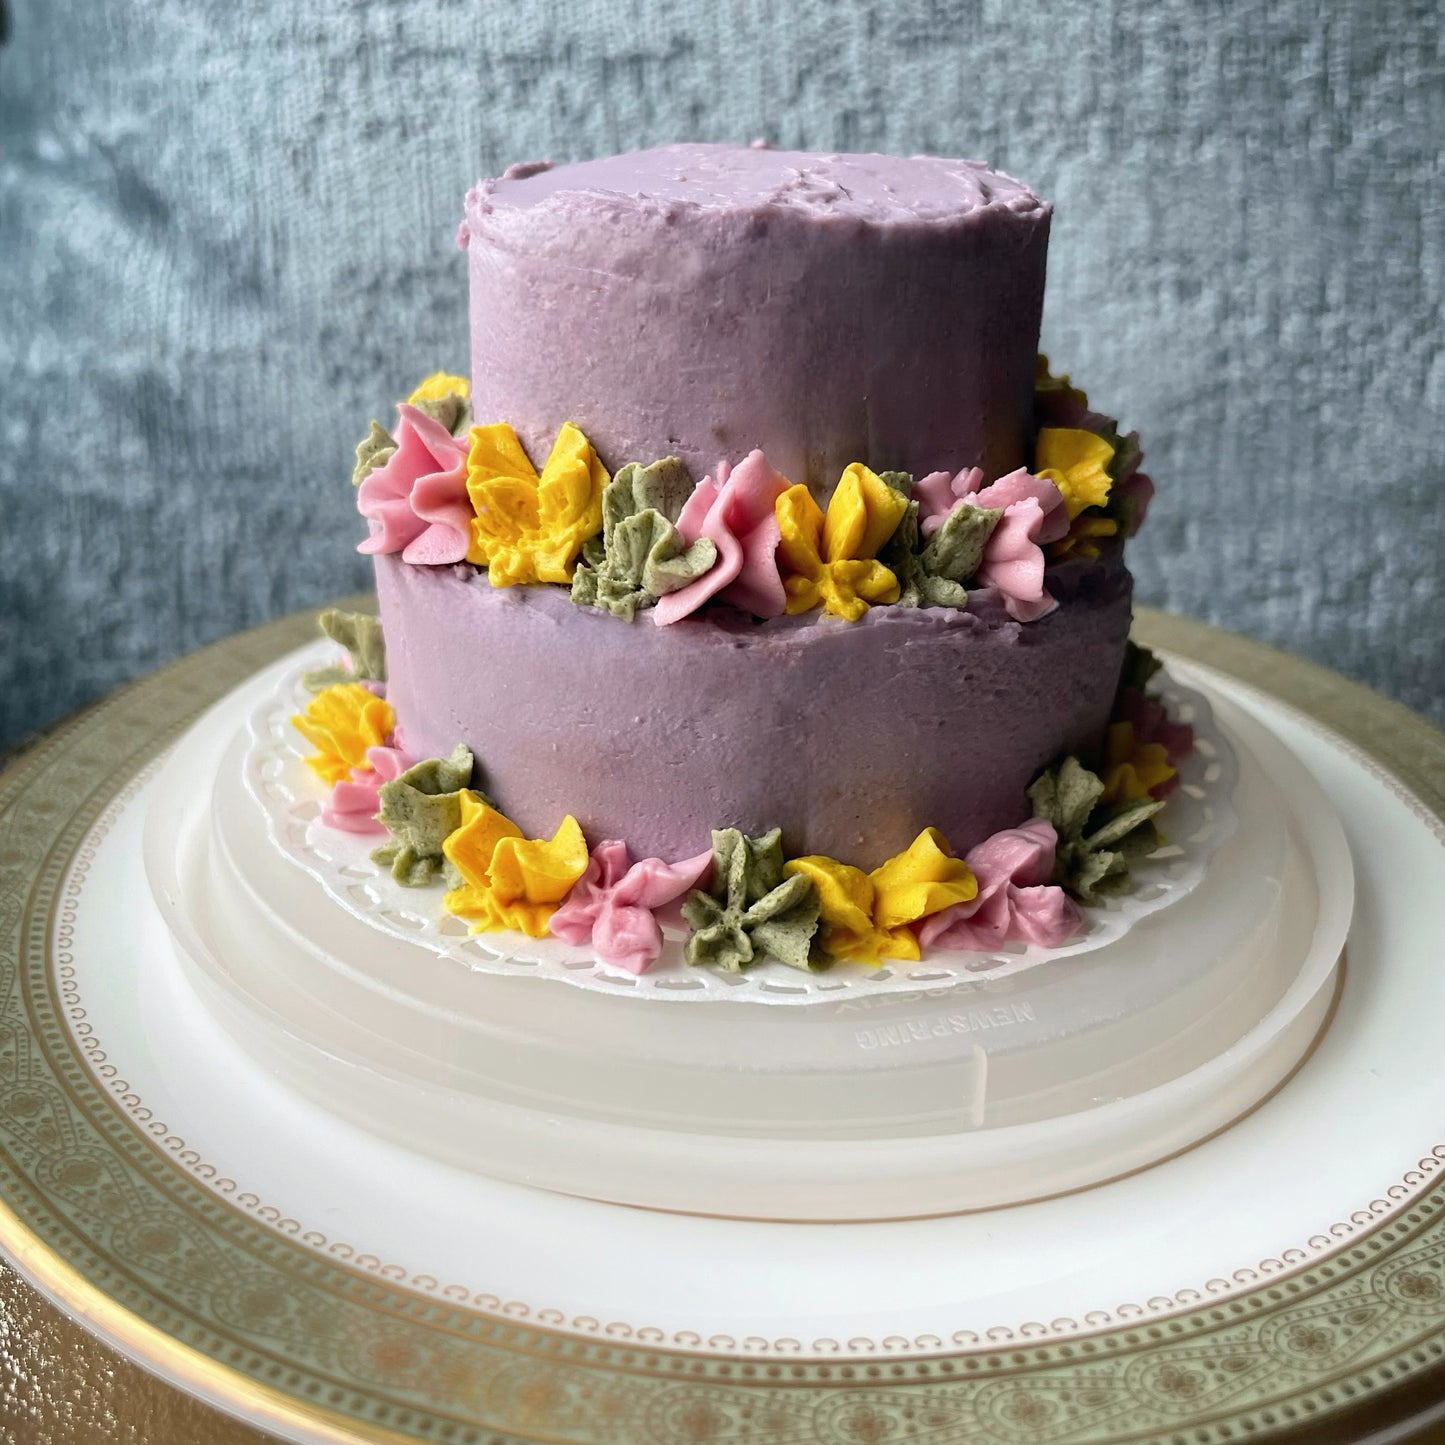 A purple two-tier cake with yellow, green, and pink flowers.